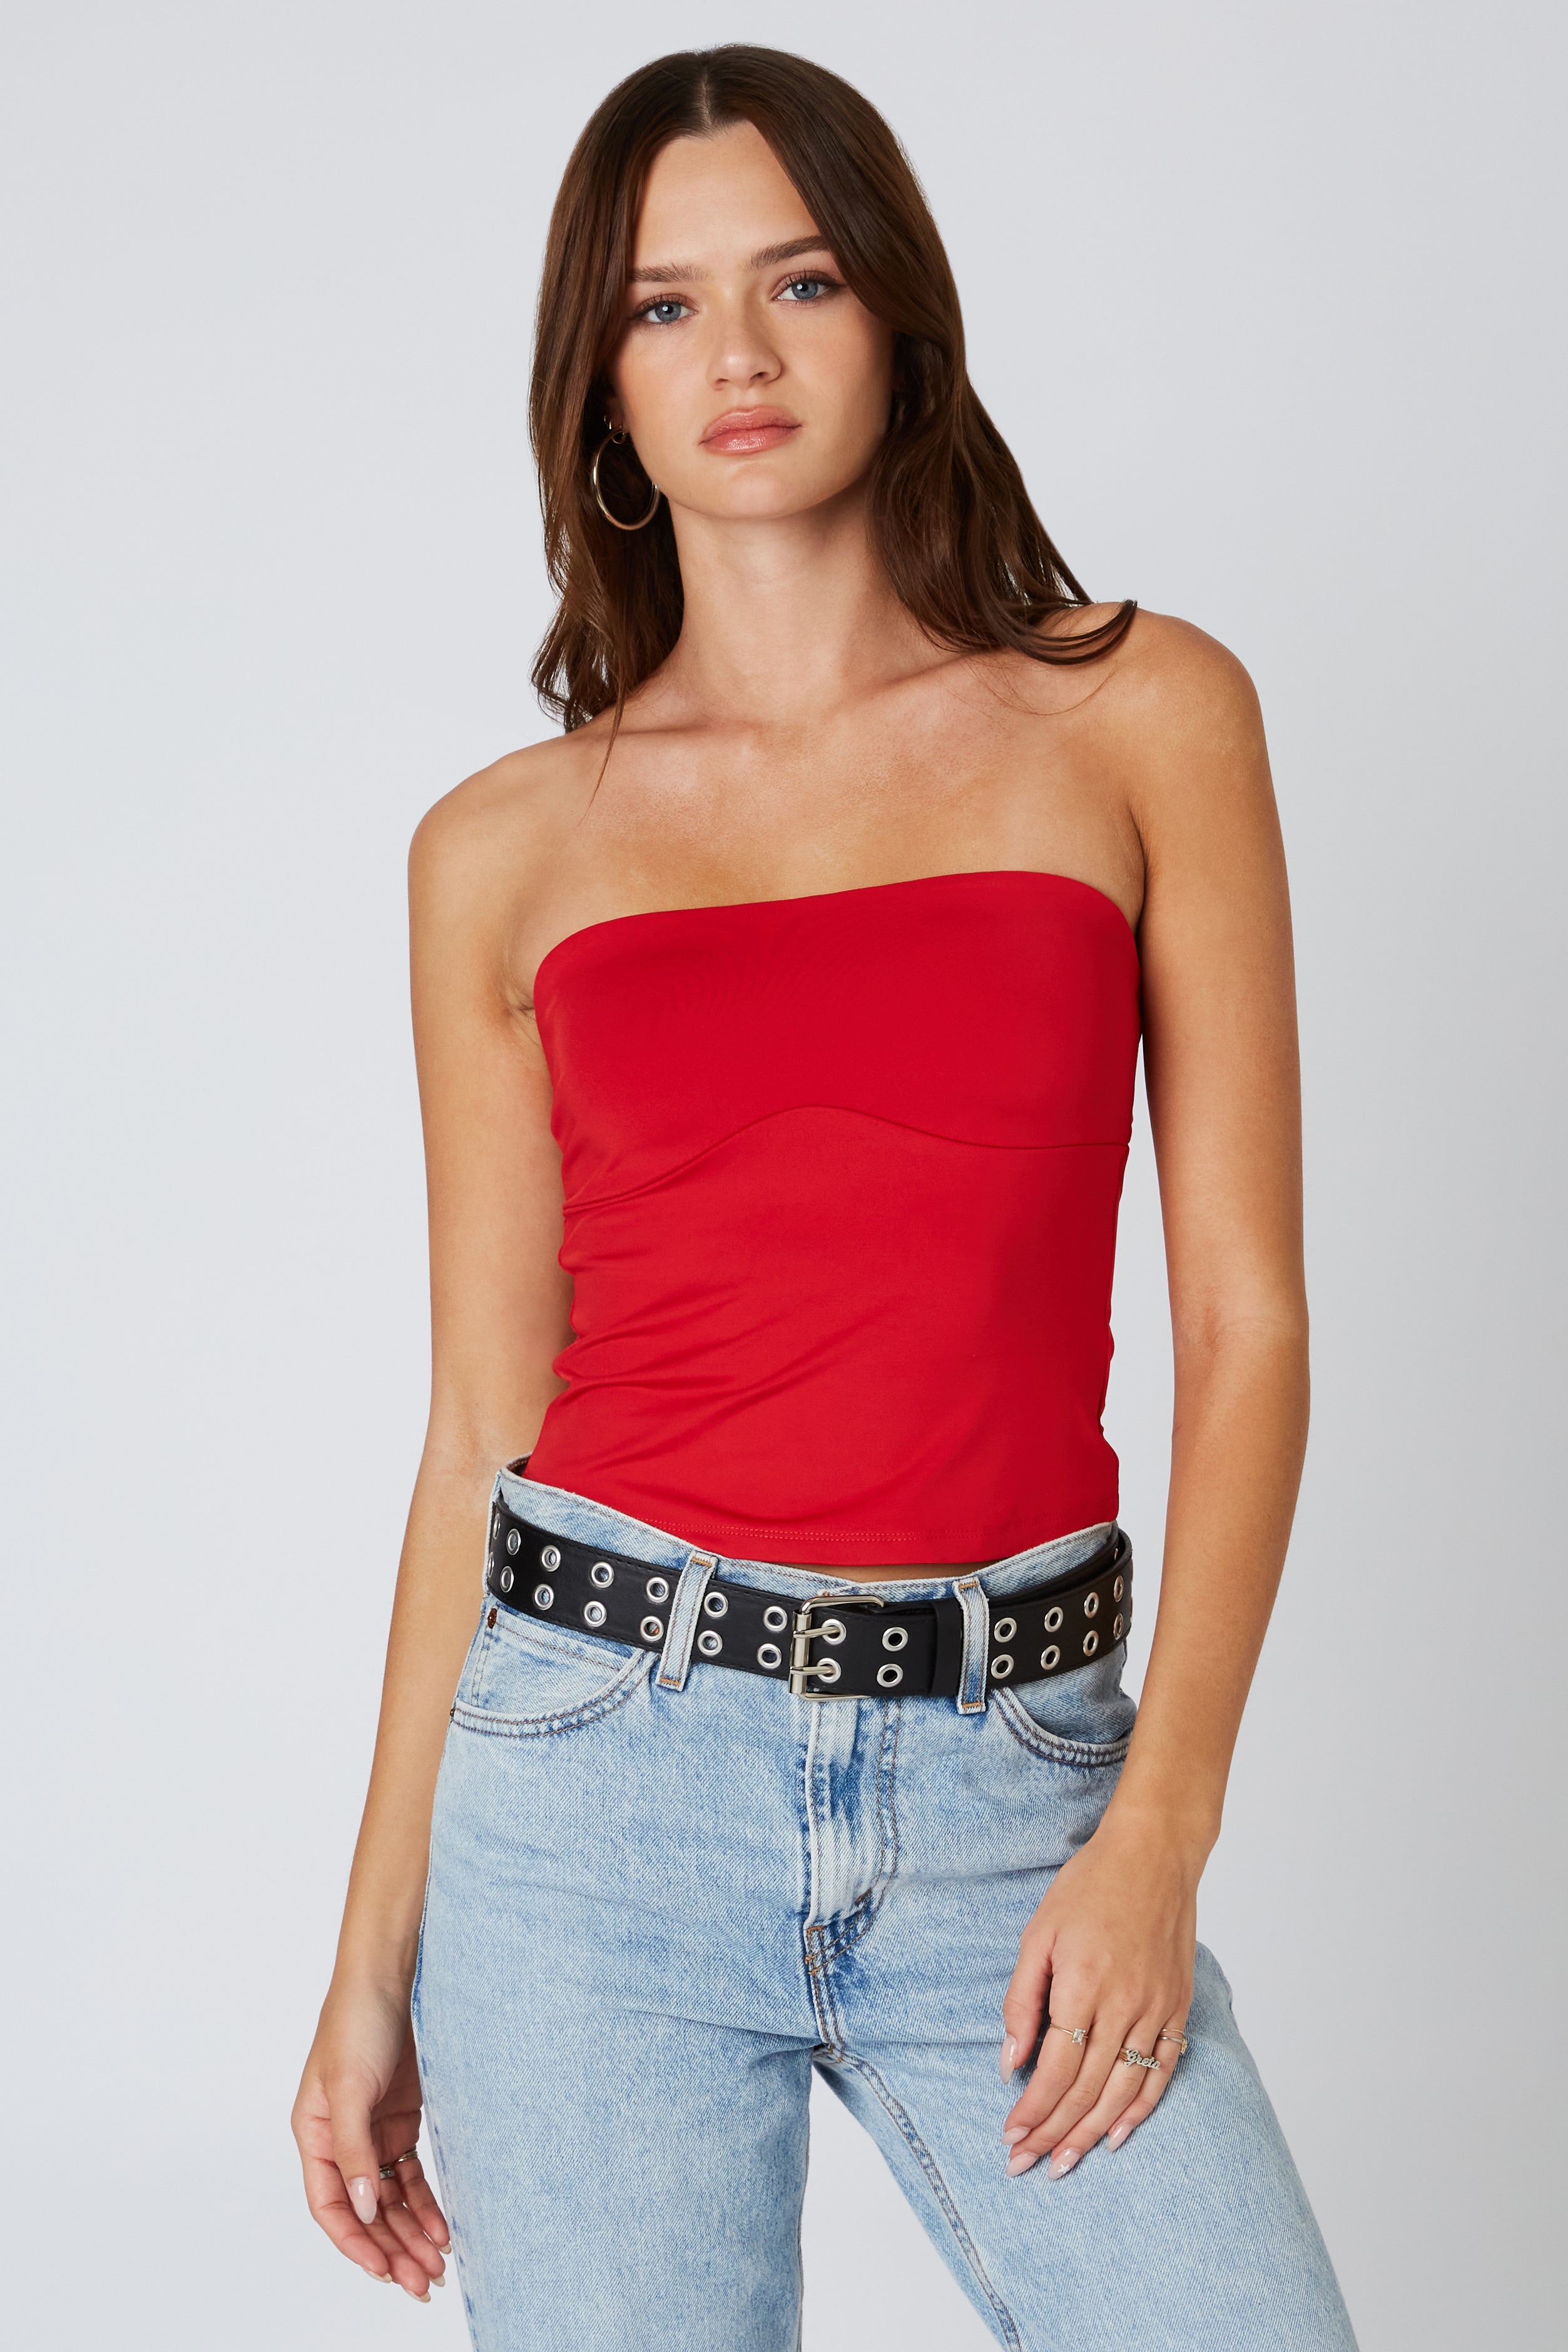 Slinky Tube Top in Red Front View